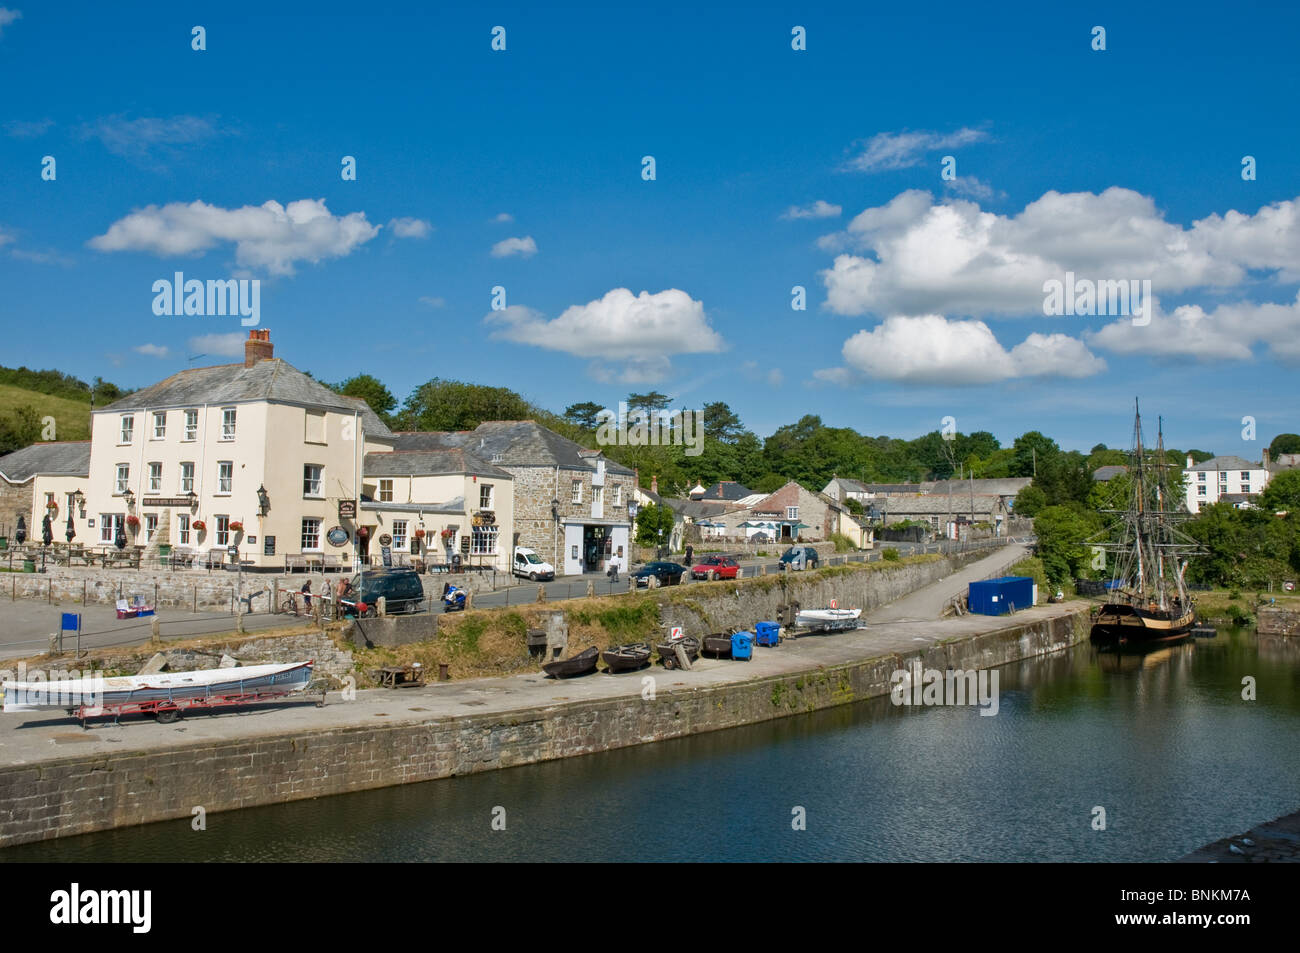 Sailing ship and other boats at old harbour Charlestown nr St. Austell Cornwall England Stock Photo